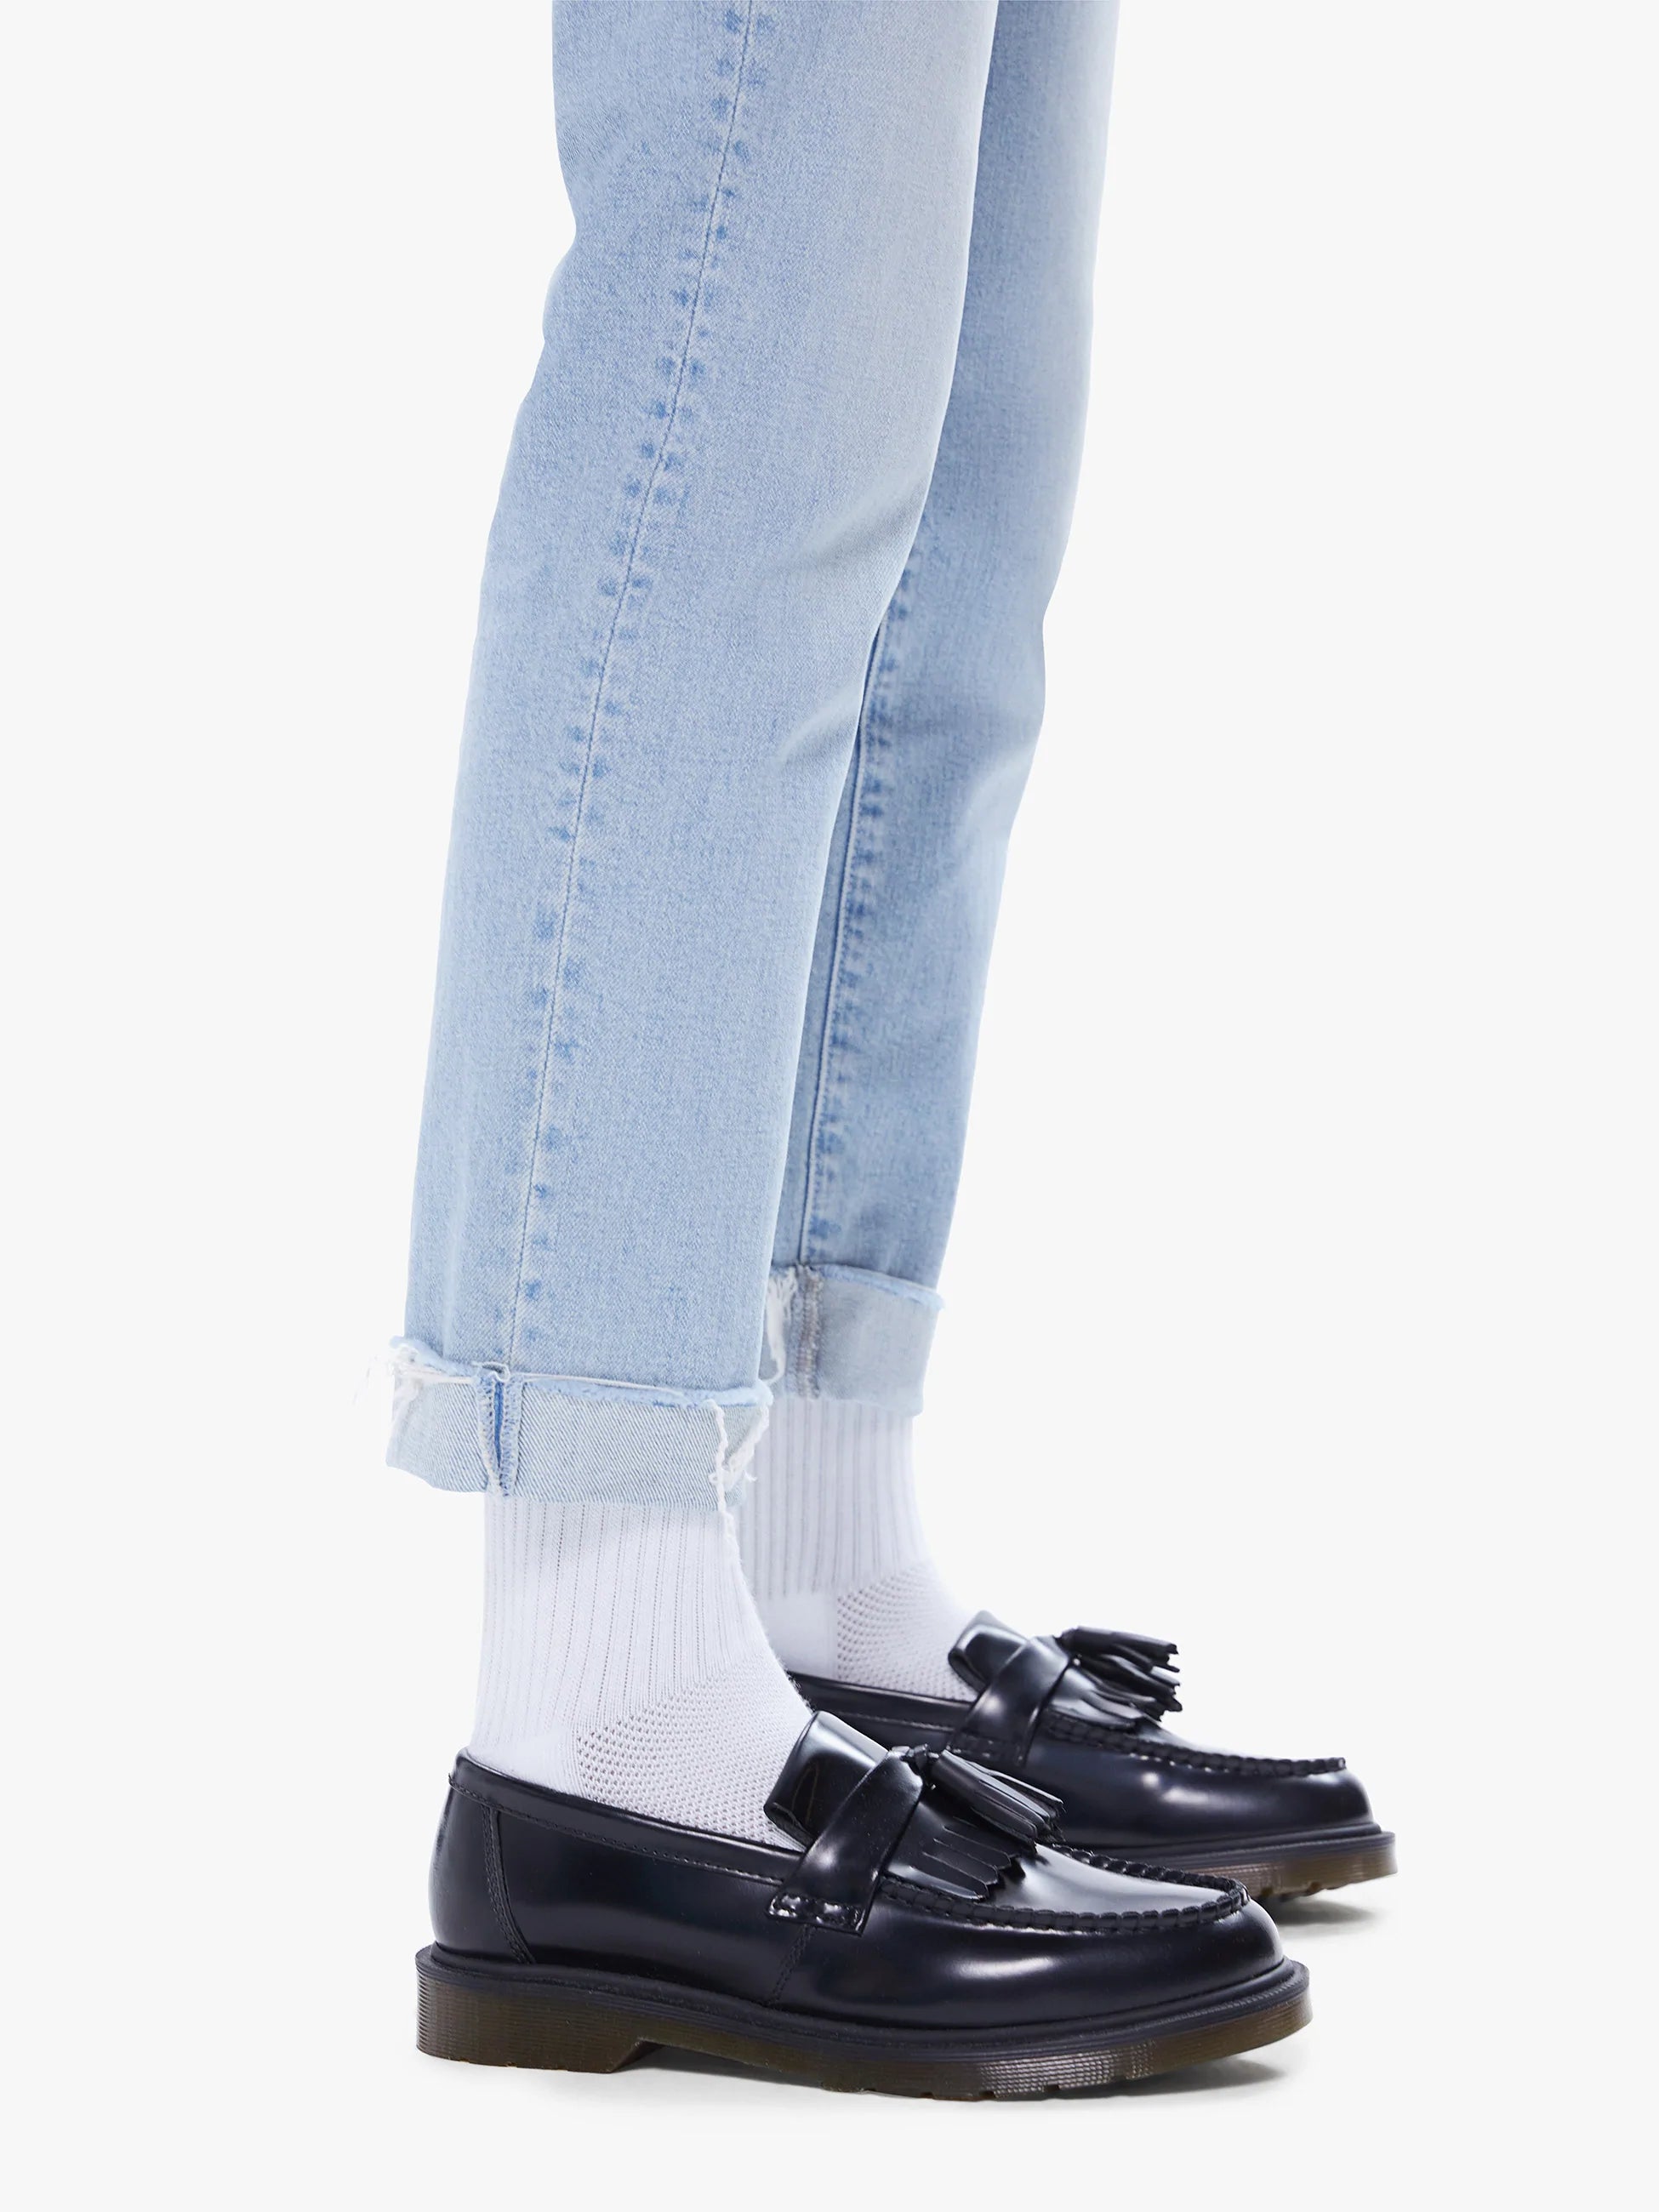 Scrapper Cuff Ankle Fray Jean - Lonely Hearts Club